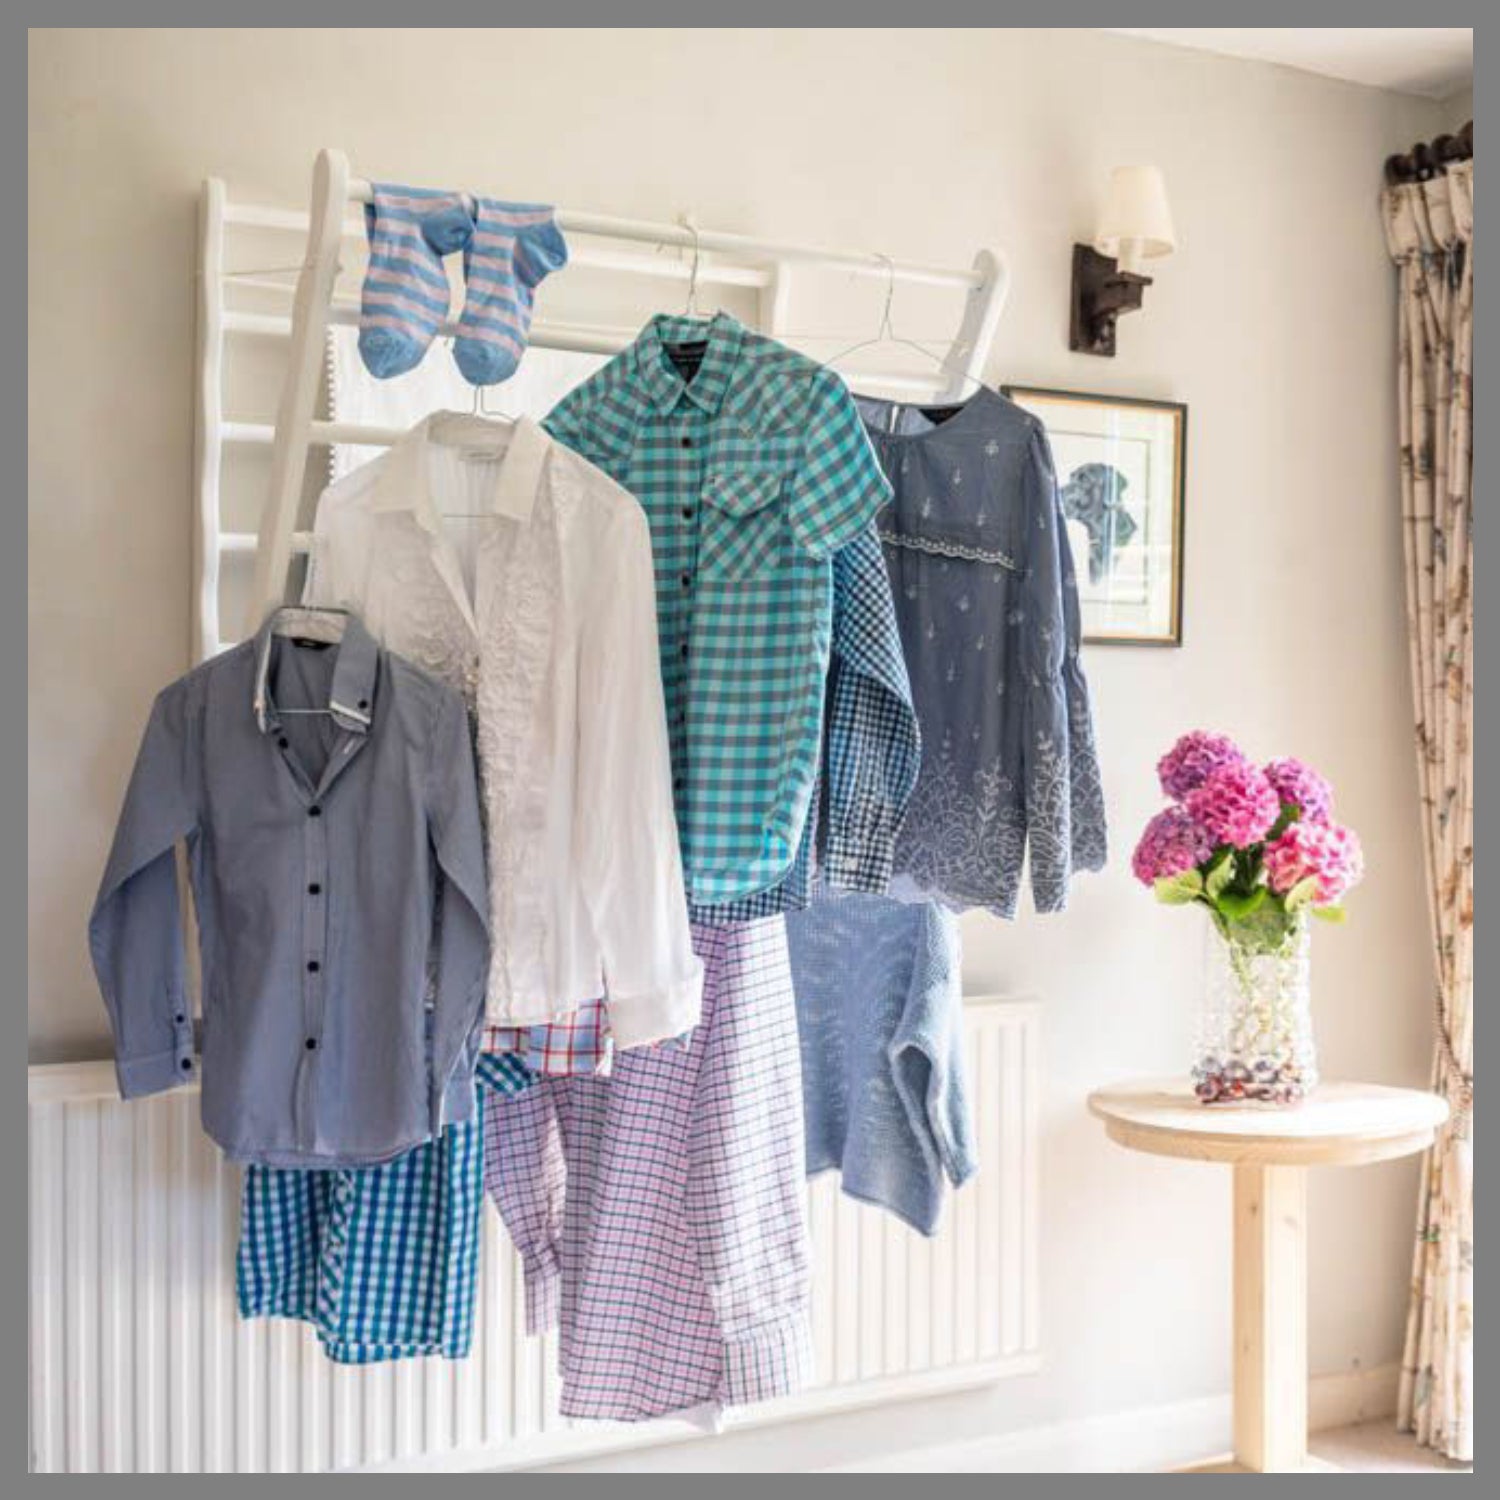 Laundry Ladder displaying clothes hanging on coat hangers 